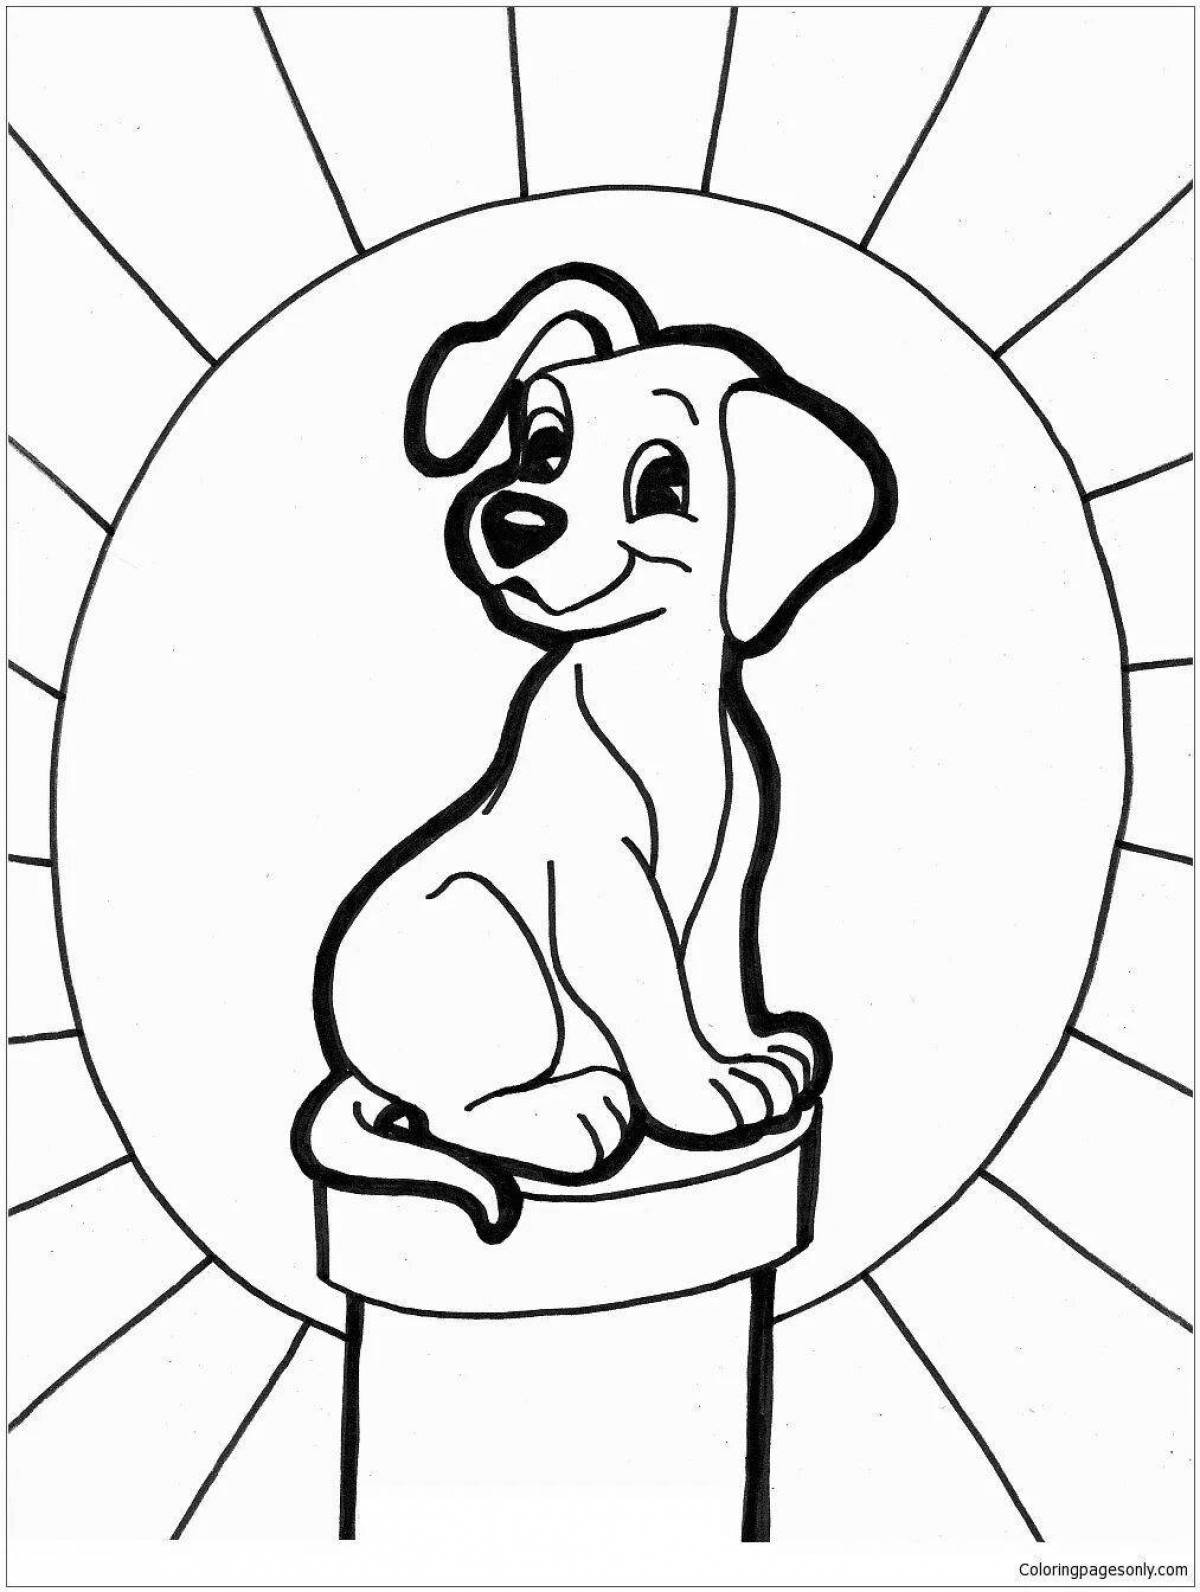 Coloring page wonderful dog house